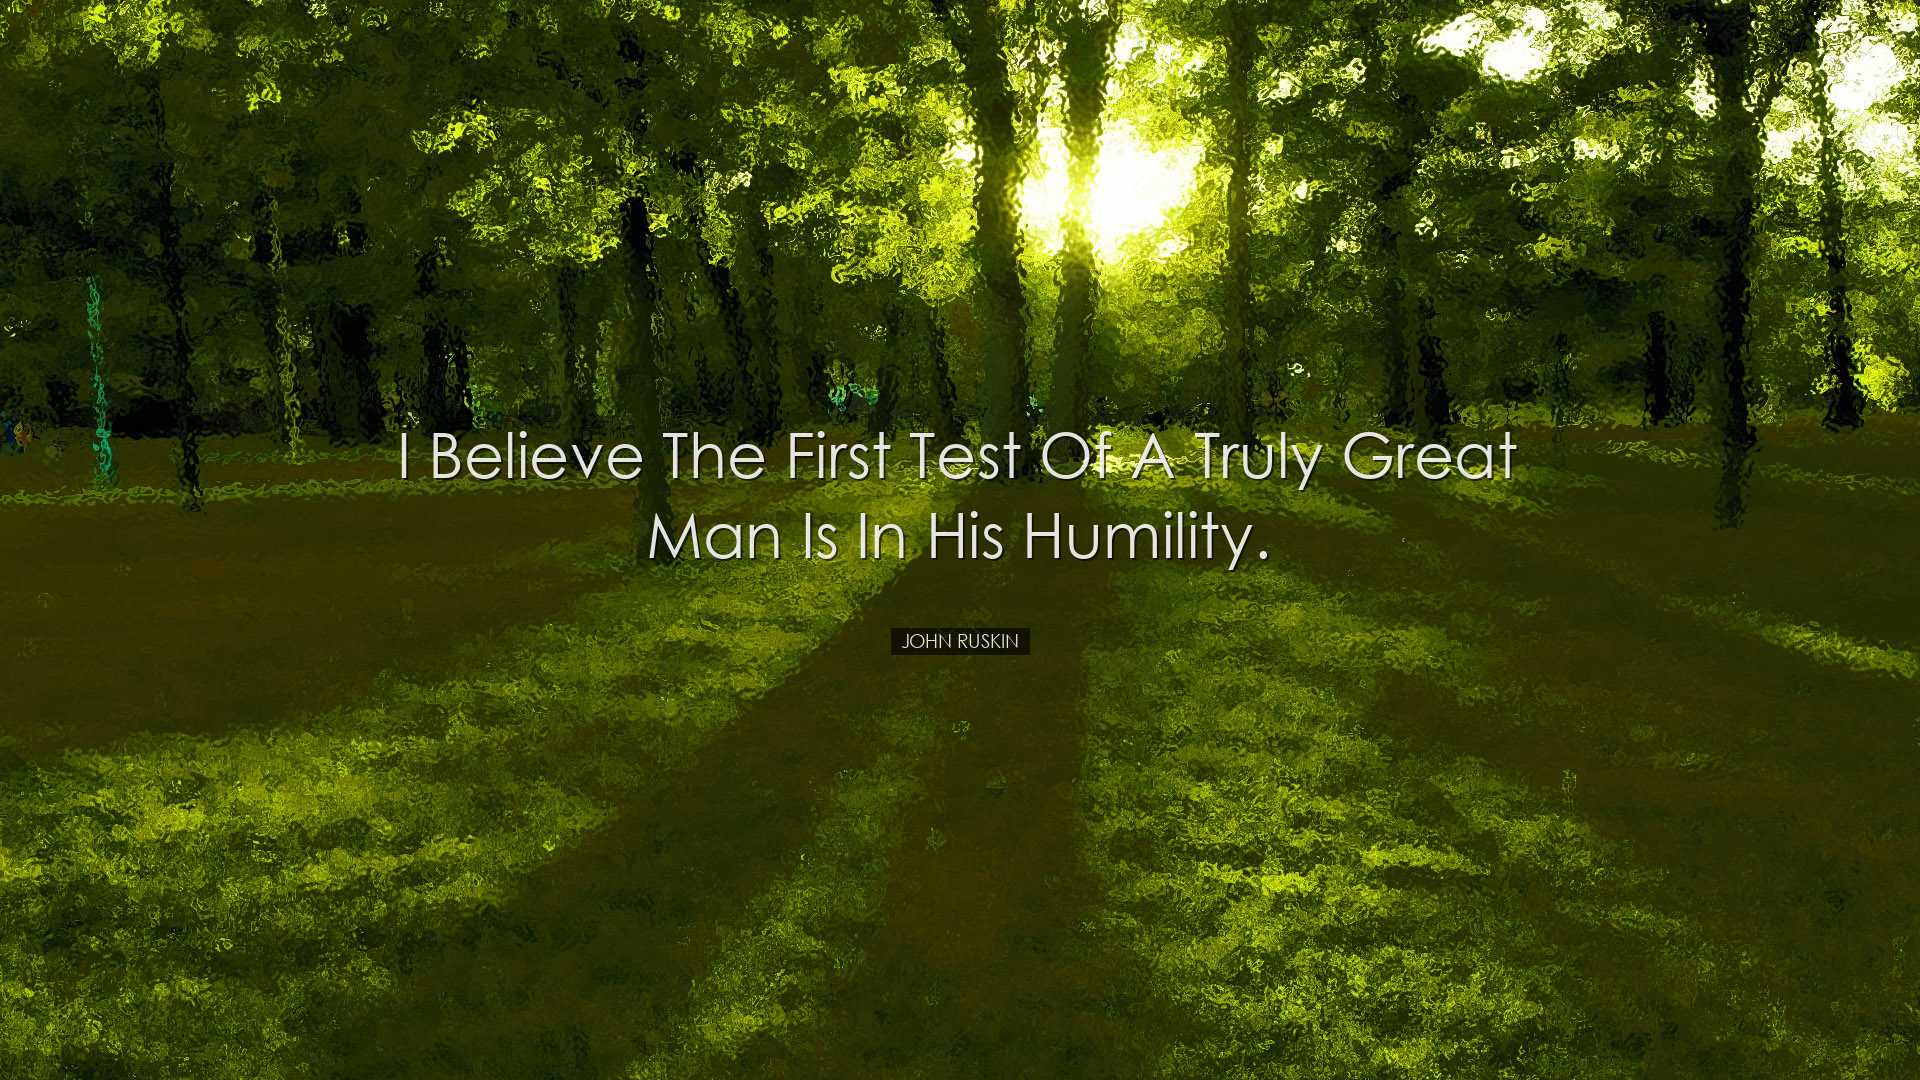 I believe the first test of a truly great man is in his humility.